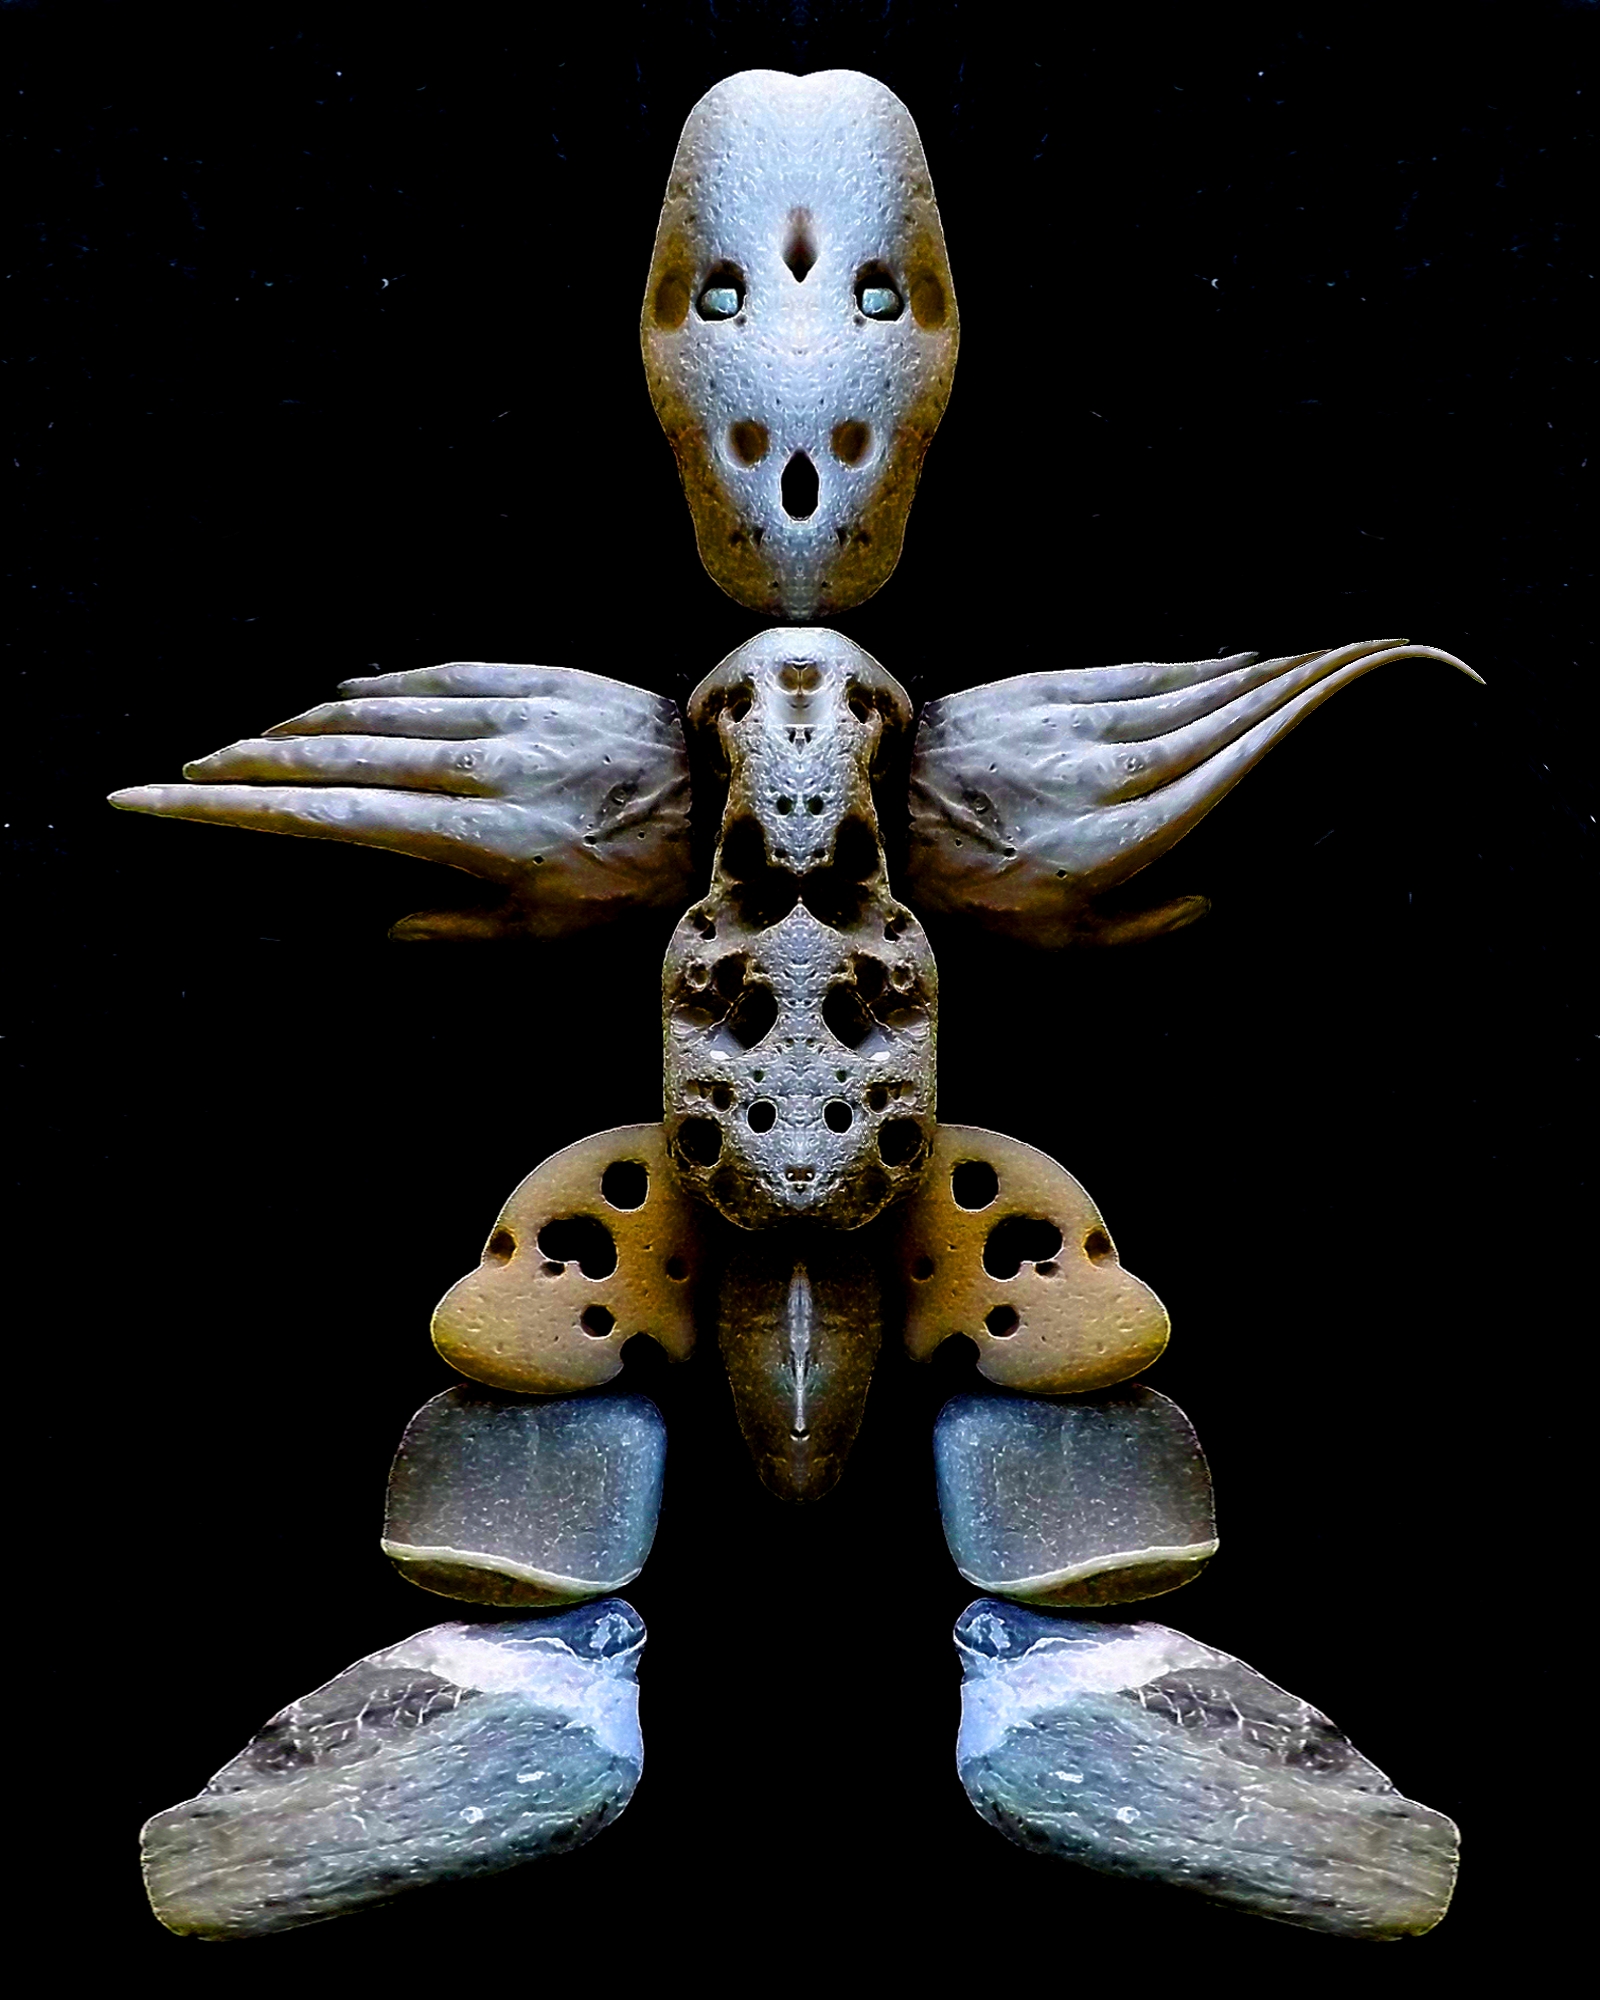 A winged figure with body and head made of pebbles